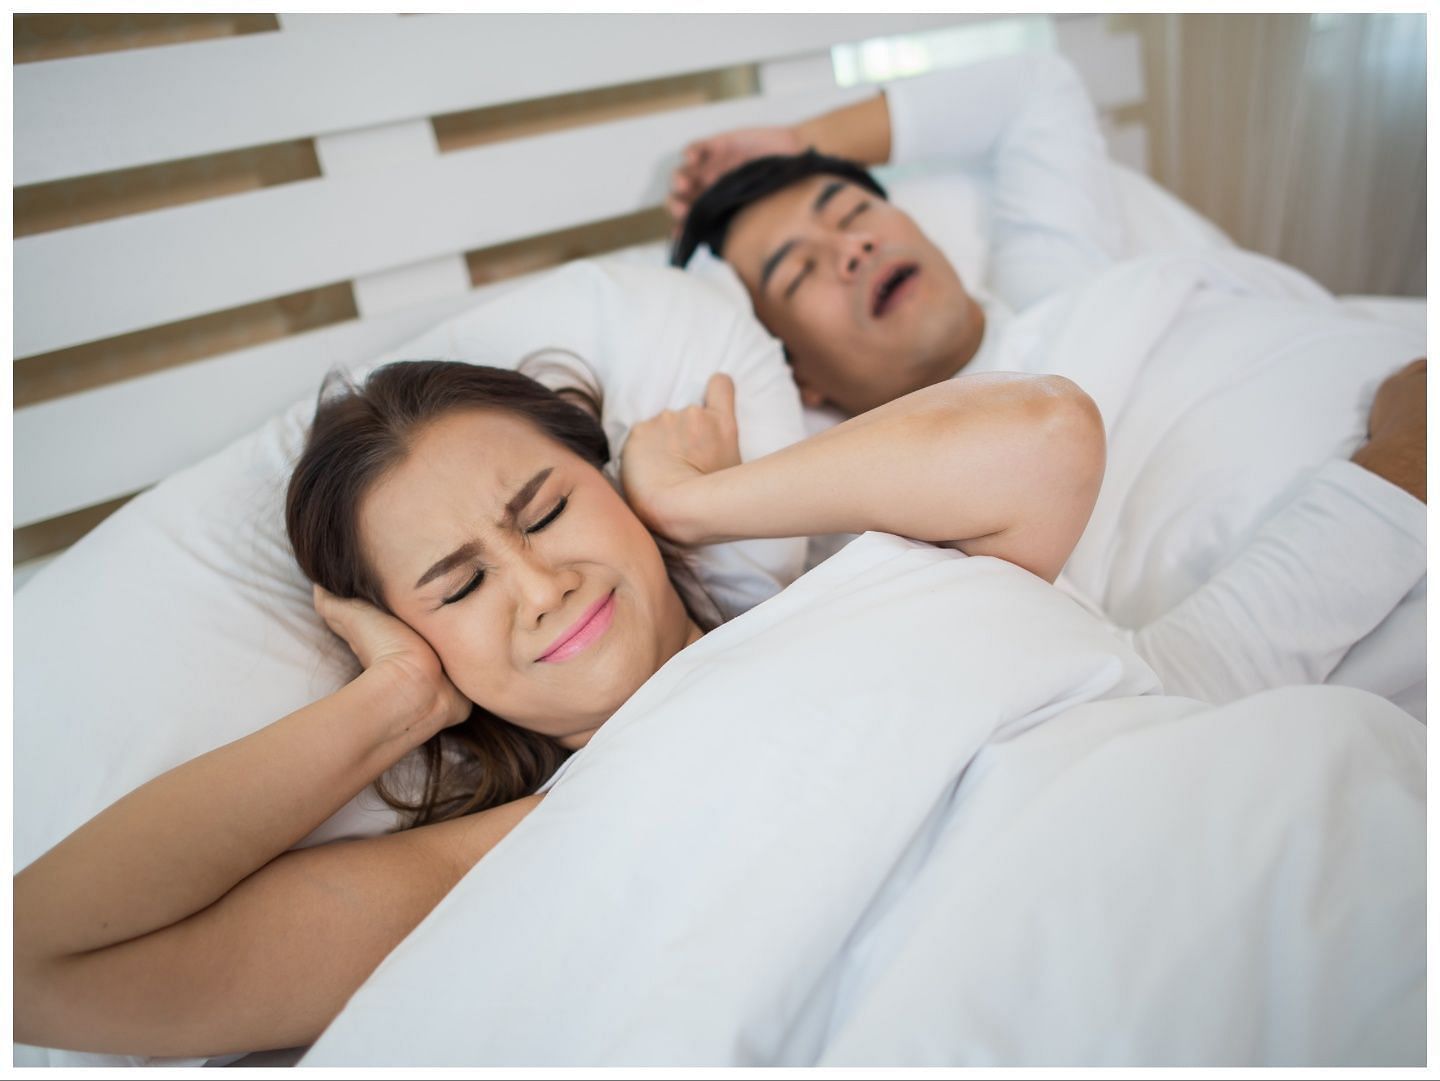 Snoring can be a sign of health risks (Image via Vecteezy)